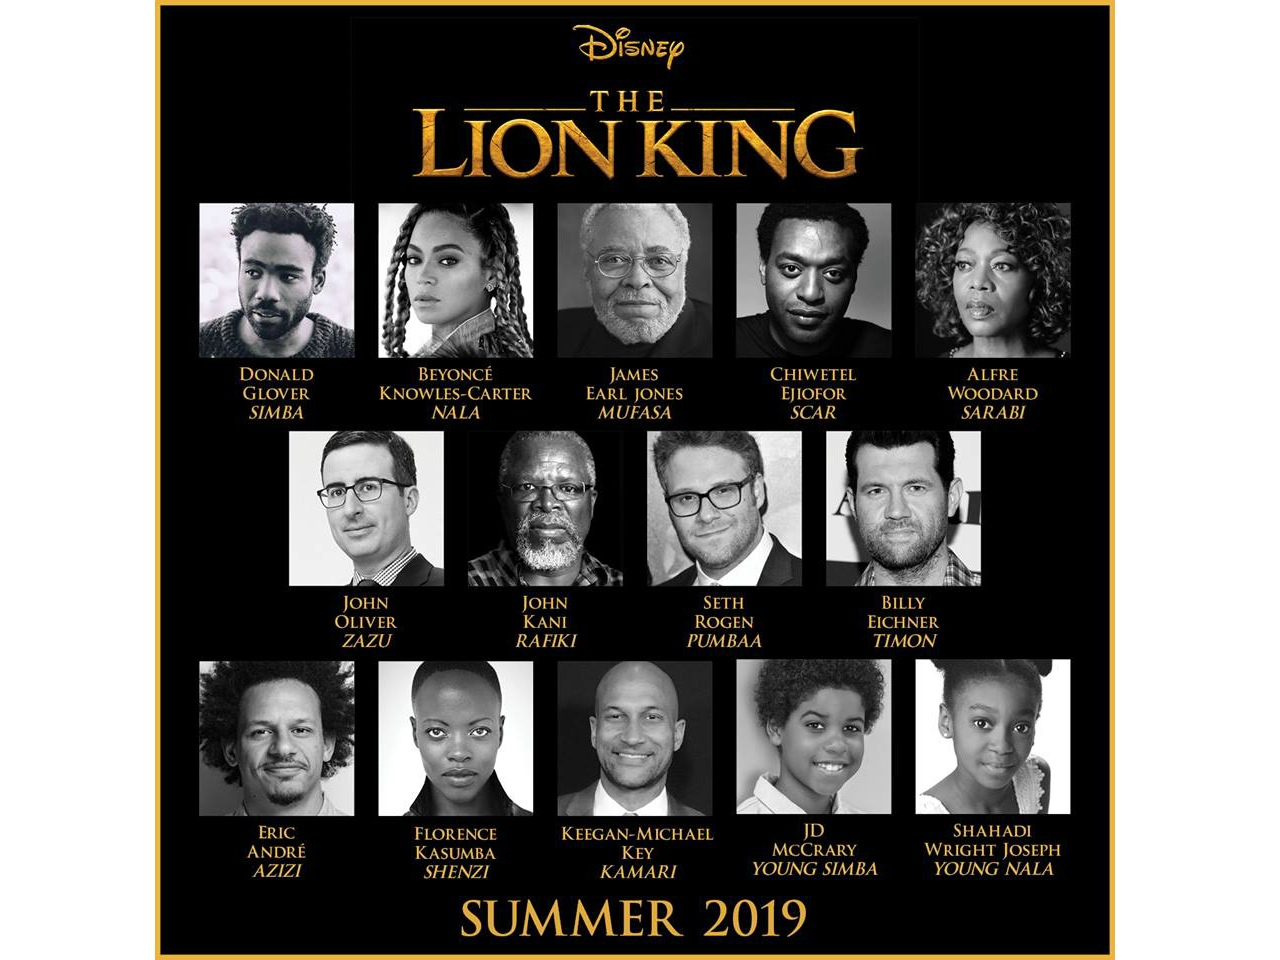 Image showing the full cast of the 2019 remake of the Lion King